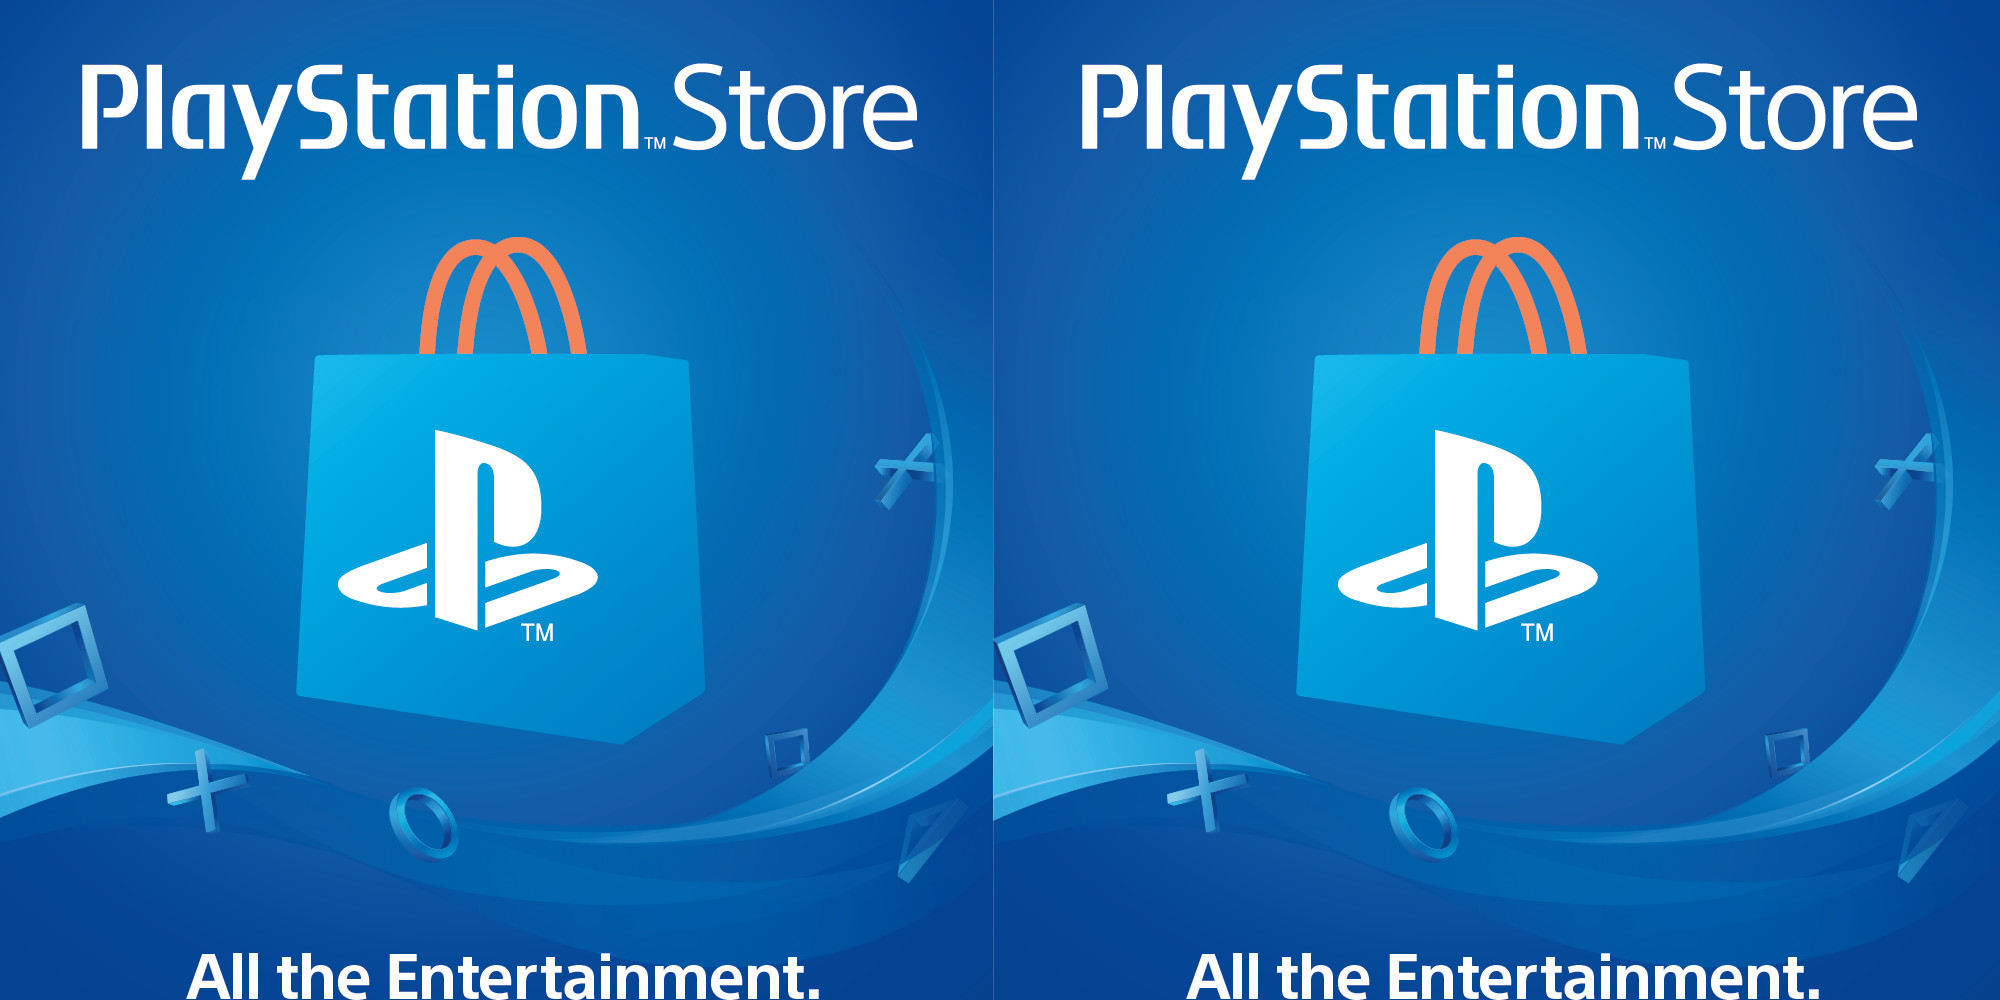 Grab a $60 PlayStation Store Gift Card for $50 ahead of Black Friday sales